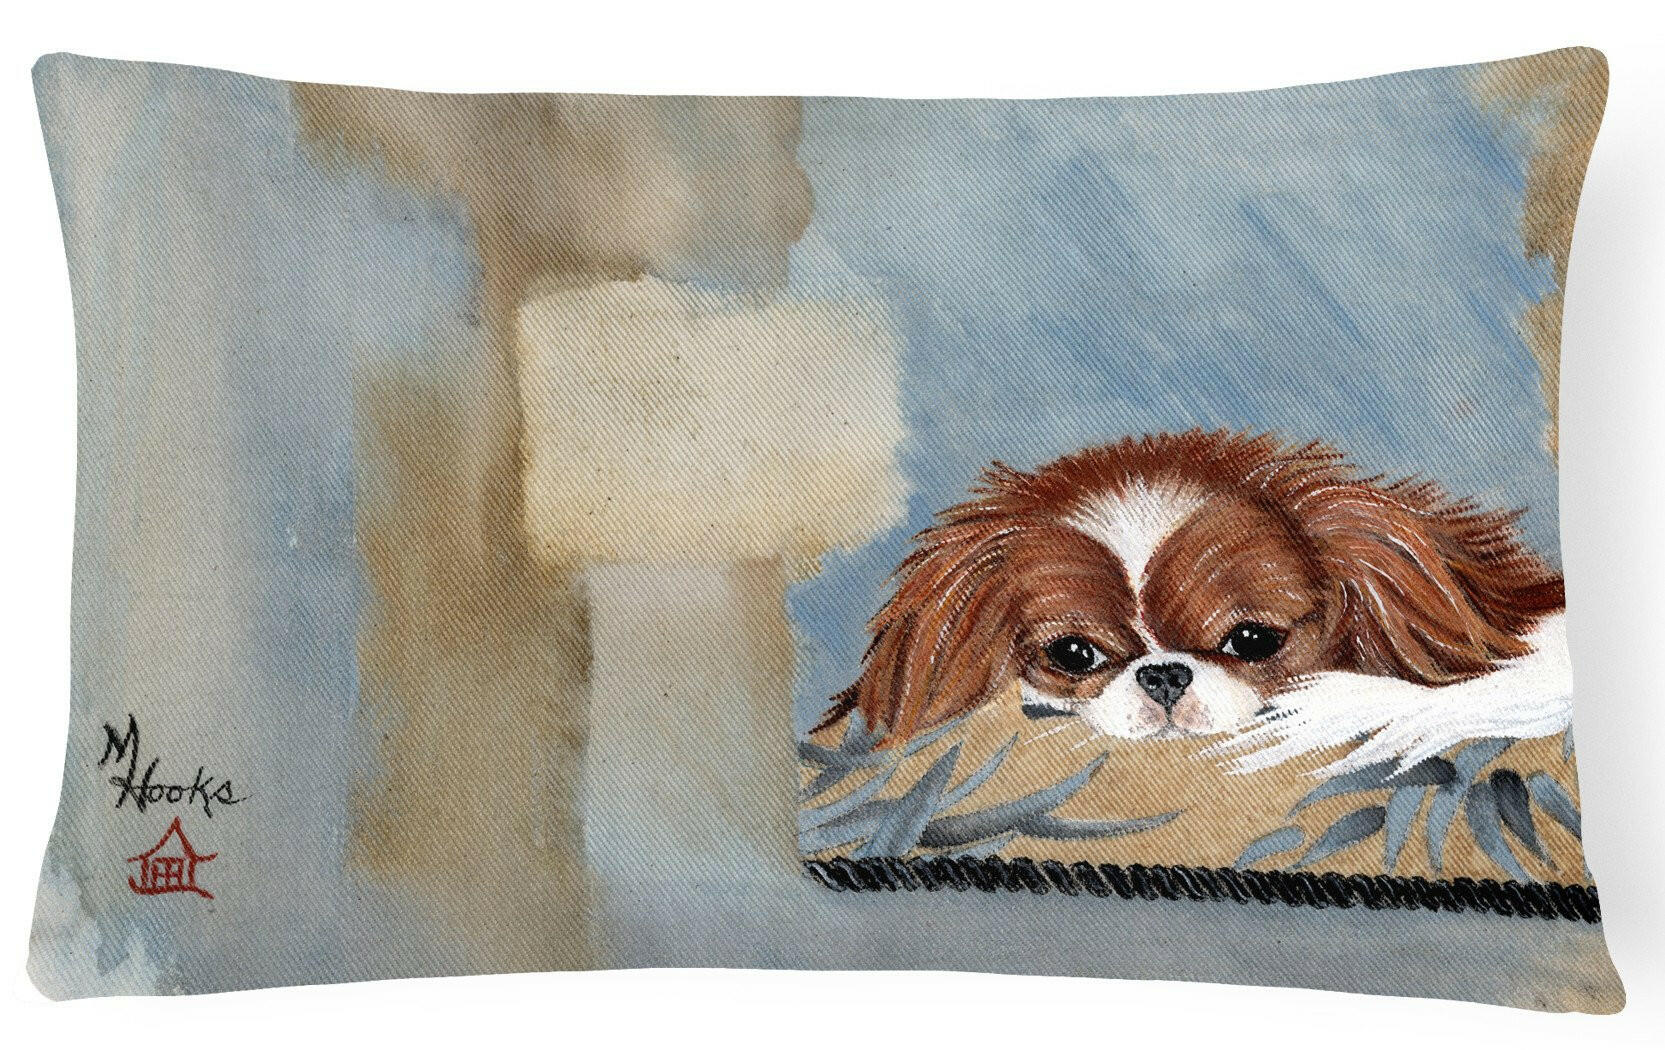 Japanese Chin Resting Fabric Decorative Pillow MH1010PW1216 by Caroline's Treasures